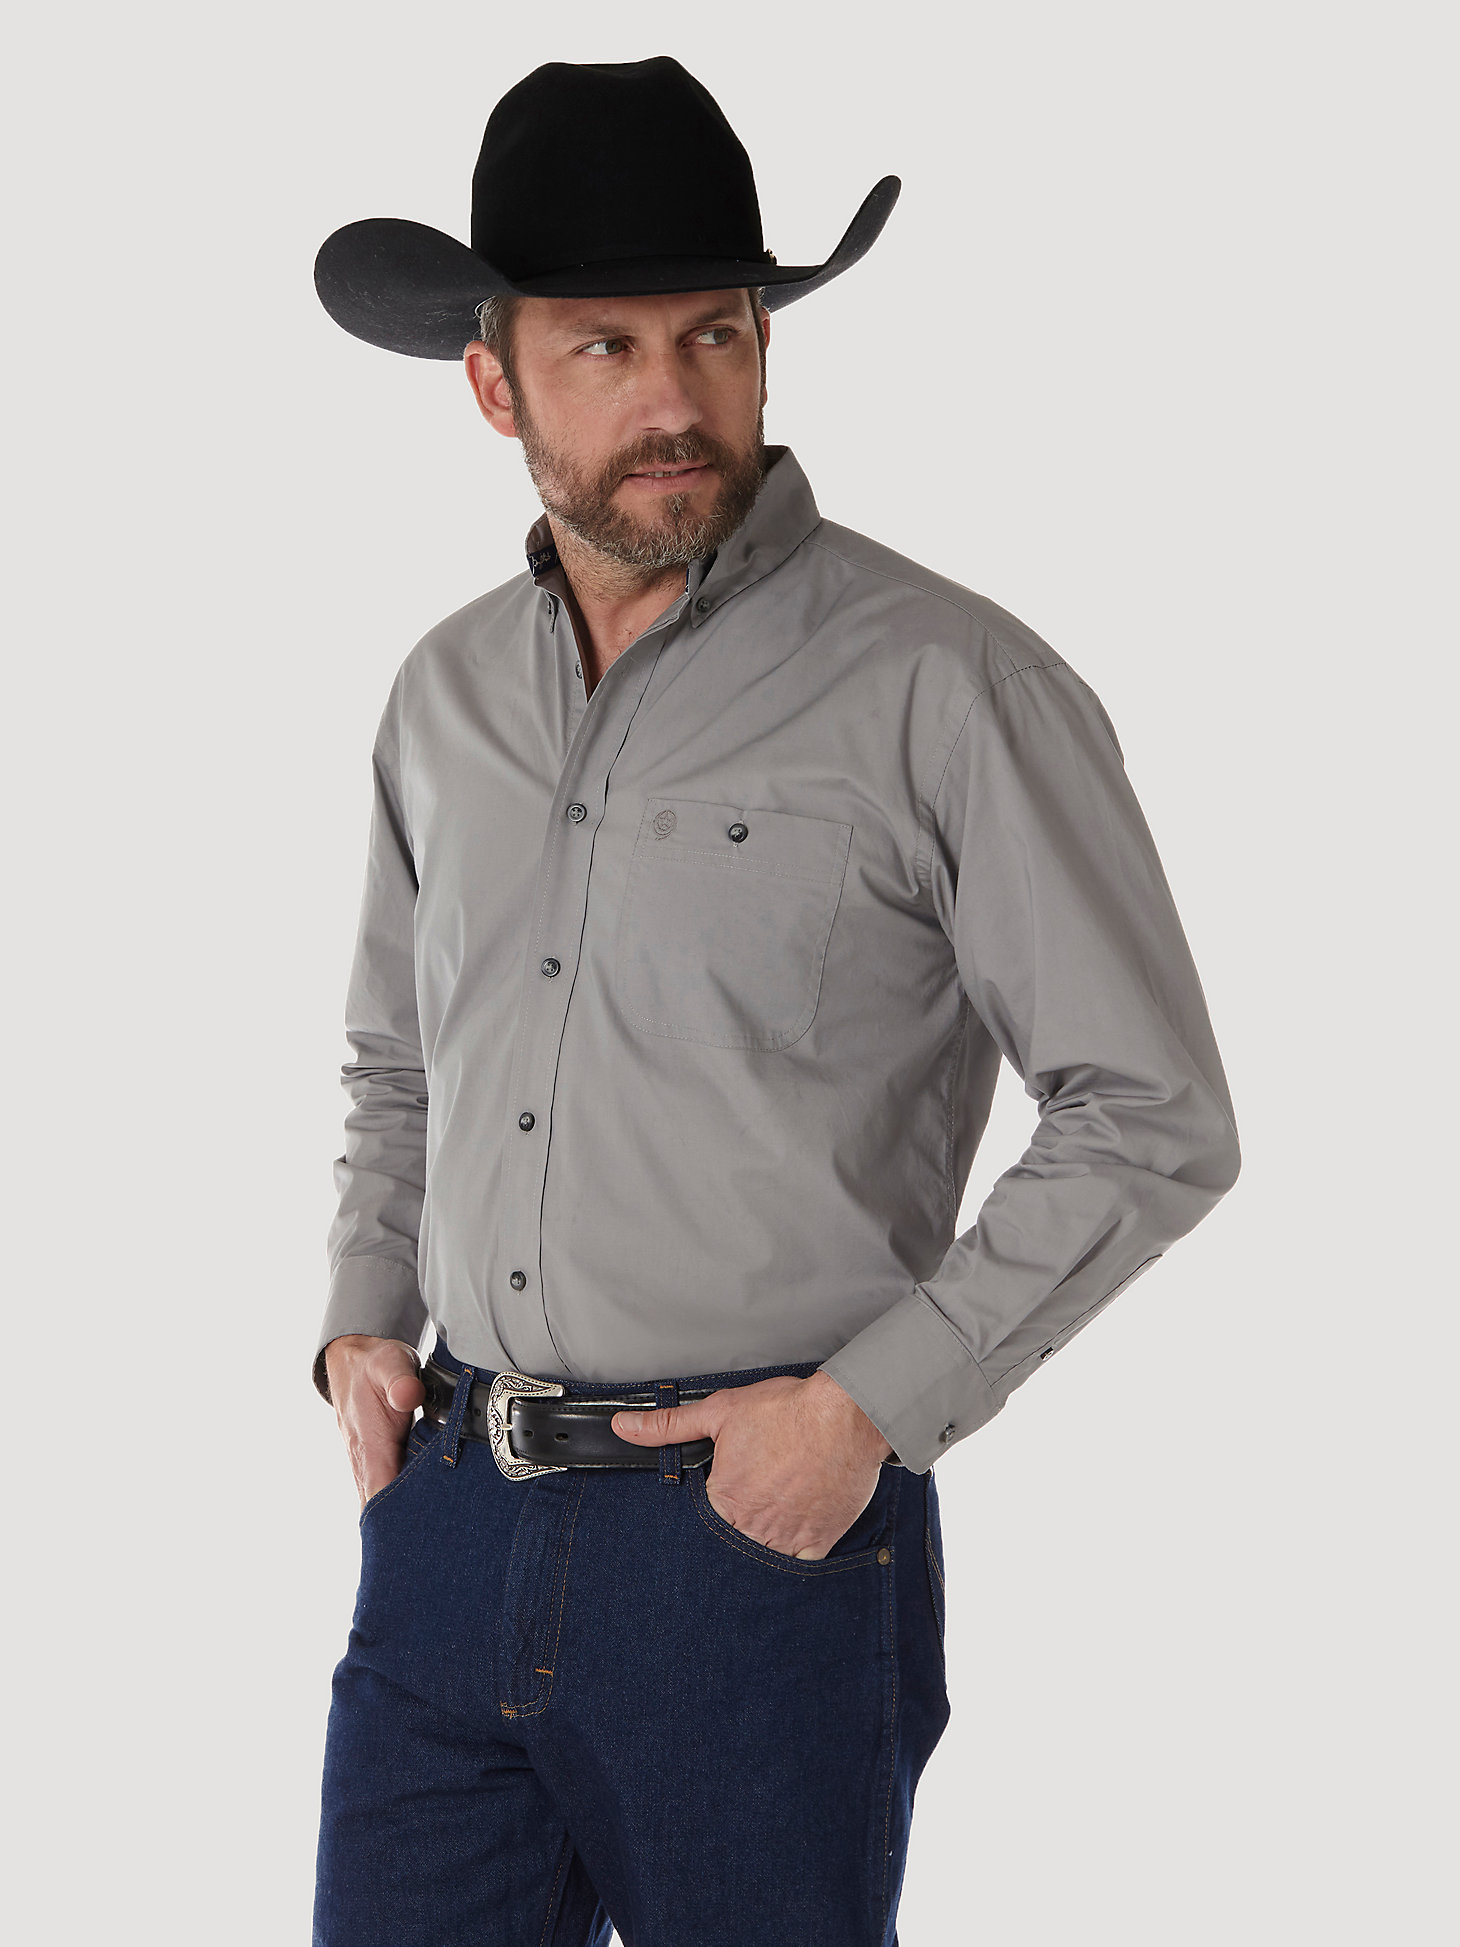 Men's George Strait Long Sleeve Button Down Solid Shirt in Grey main view